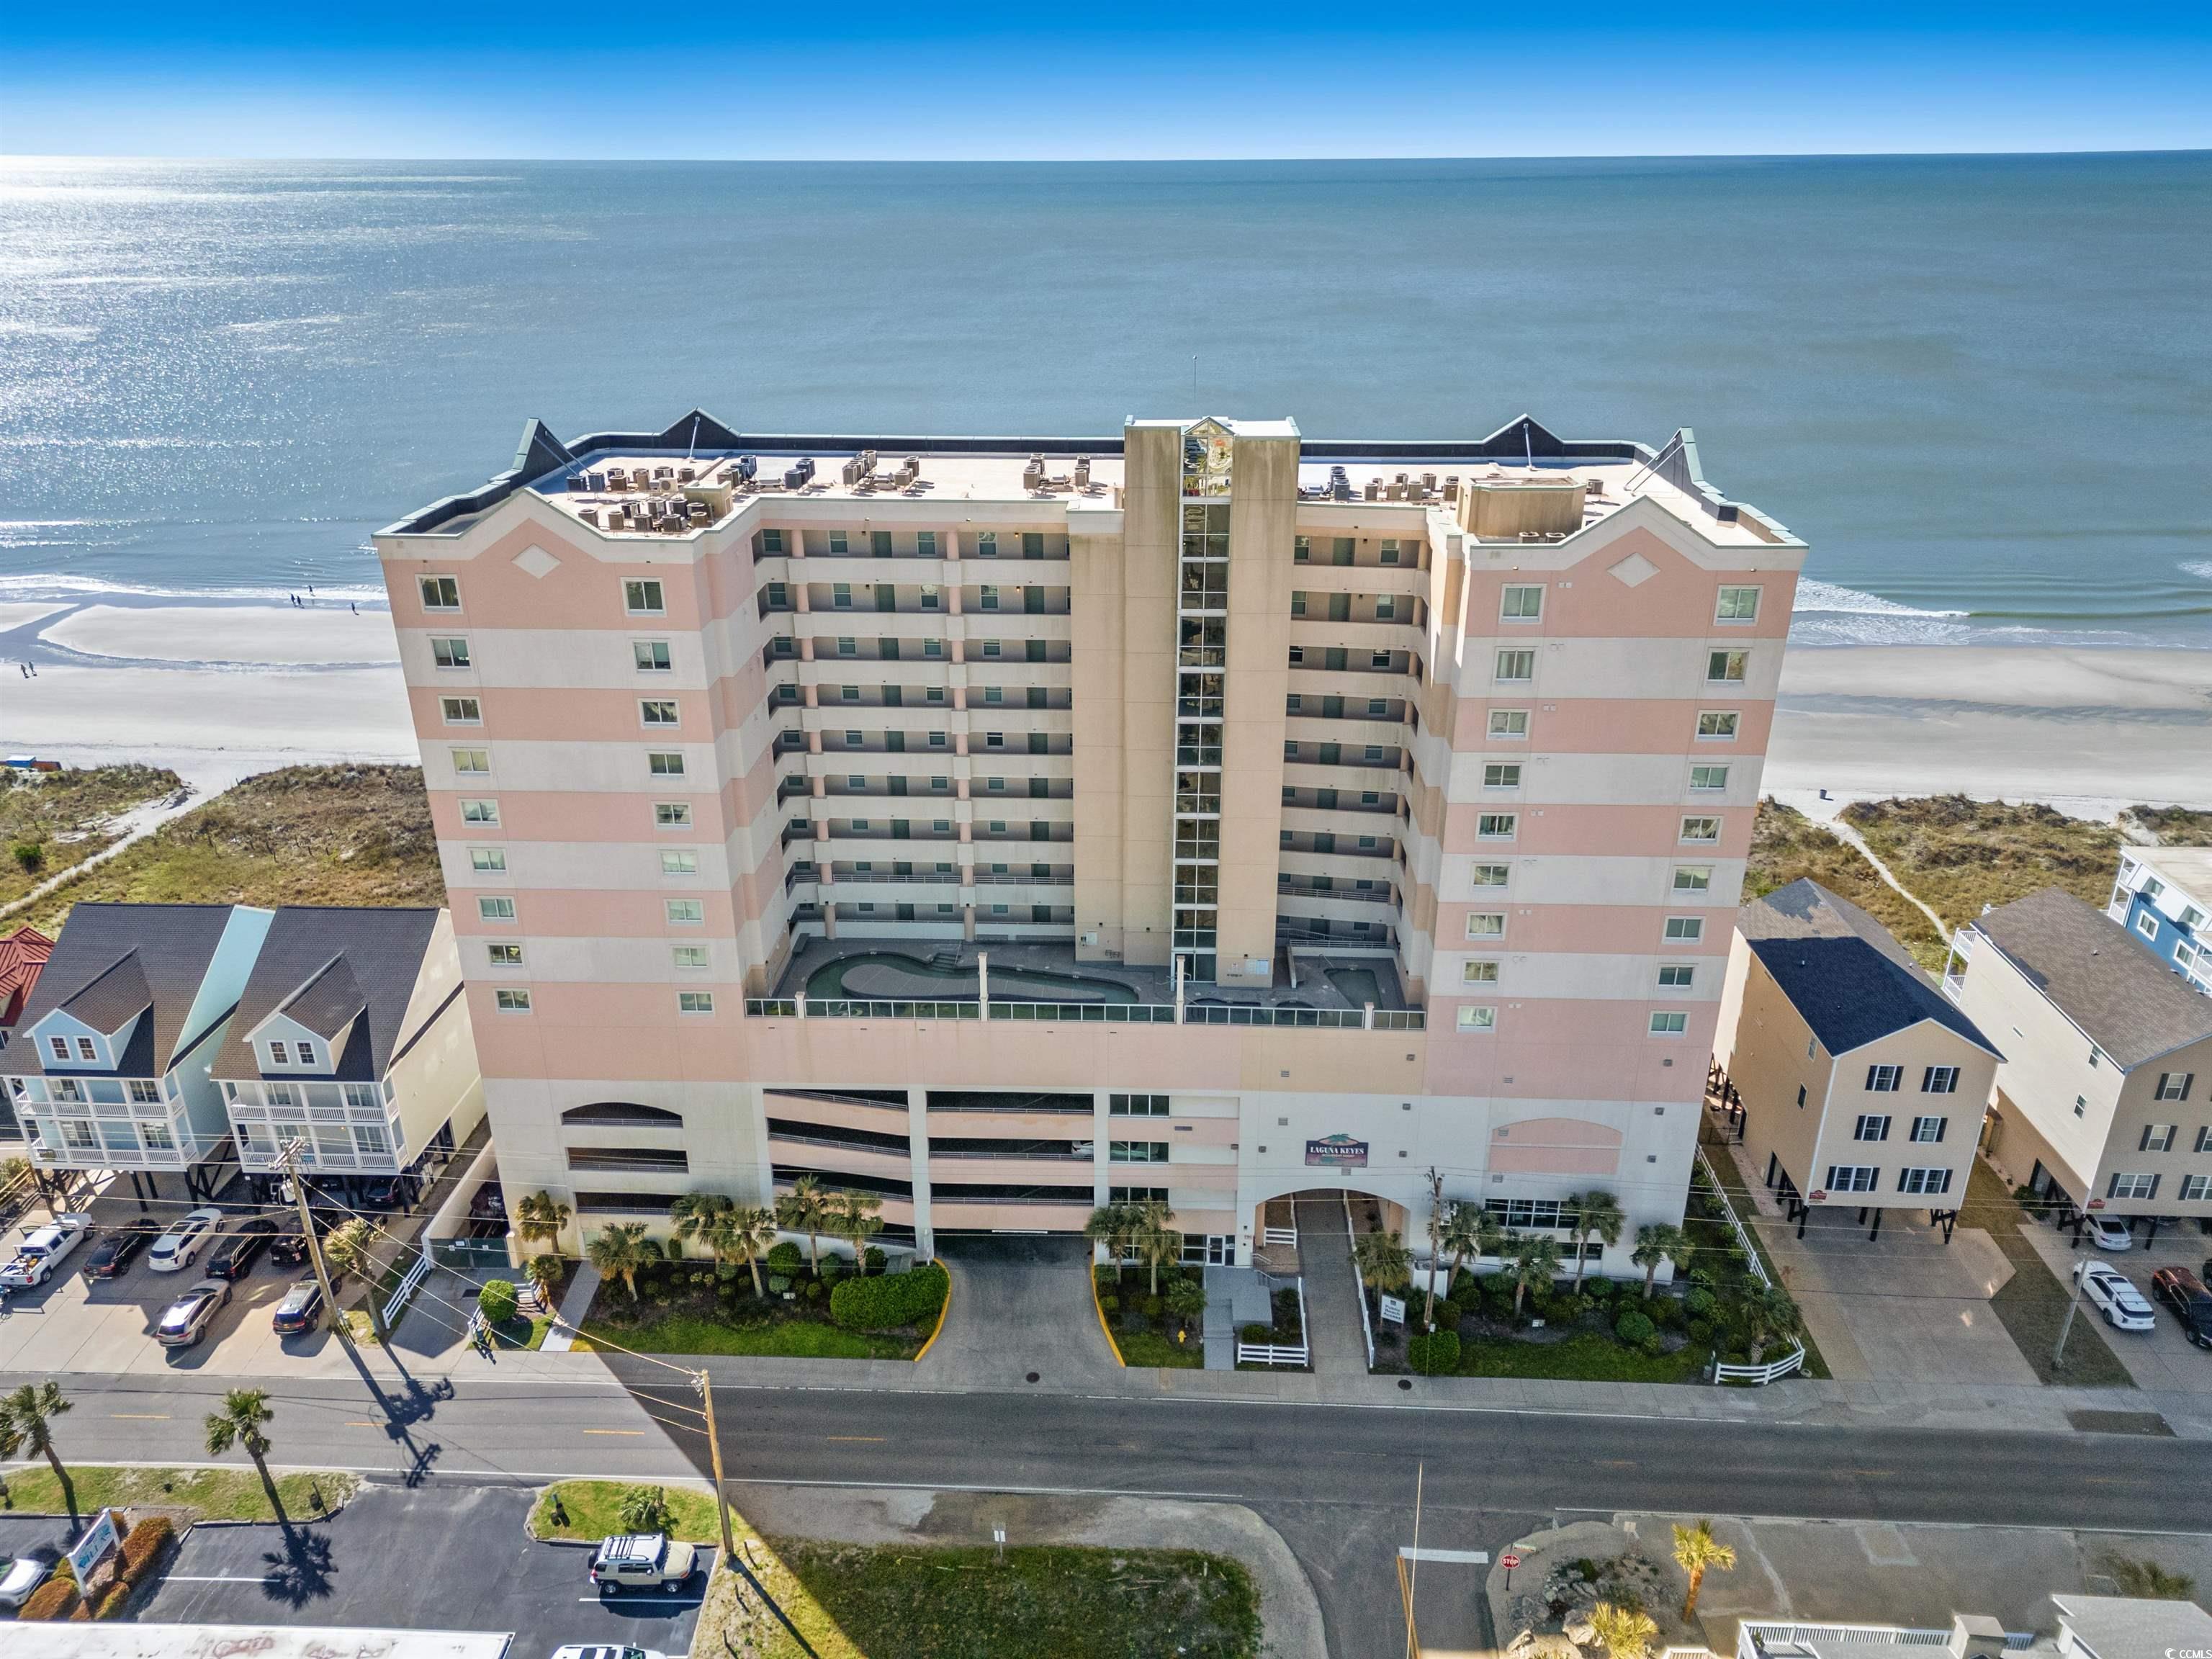 step into coastal luxury at laguna keyes, a premier destination in the serene cherry grove section of north myrtle beach. this one-bedroom oceanfront gem showcases breathtaking views of the atlantic ocean, setting the stage for your own personal seaside retreat. imagine waking up to the gentle sounds of the waves and starting your day with a cup of coffee on your private balcony, enveloped in the golden glow of the sunrise. as evening approaches, toast to the good life with your favorite drink, witnessing the sun dip below the horizon.  laguna keyes boasts an array of amenities designed for relaxation and recreation, including both an indoor and an outdoor pool, a lazy river that winds peacefully, multiple hot tubs, and a state-of-the-art exercise facility. when ready to explore beyond the comfort of your new home, you'll find local landmarks such as the carolina opry and the myrtle beach sky wheel, along with a myriad of thrilling activities like parasailing and sea doo rentals, just moments away.  this property represents a superb choice for those seeking a primary residence, a vacation getaway, or a savvy investment opportunity. don't miss out on the chance to own this coastal haven. please note, all measurements and square footage are approximate. verification of details is the buyer's responsibility.